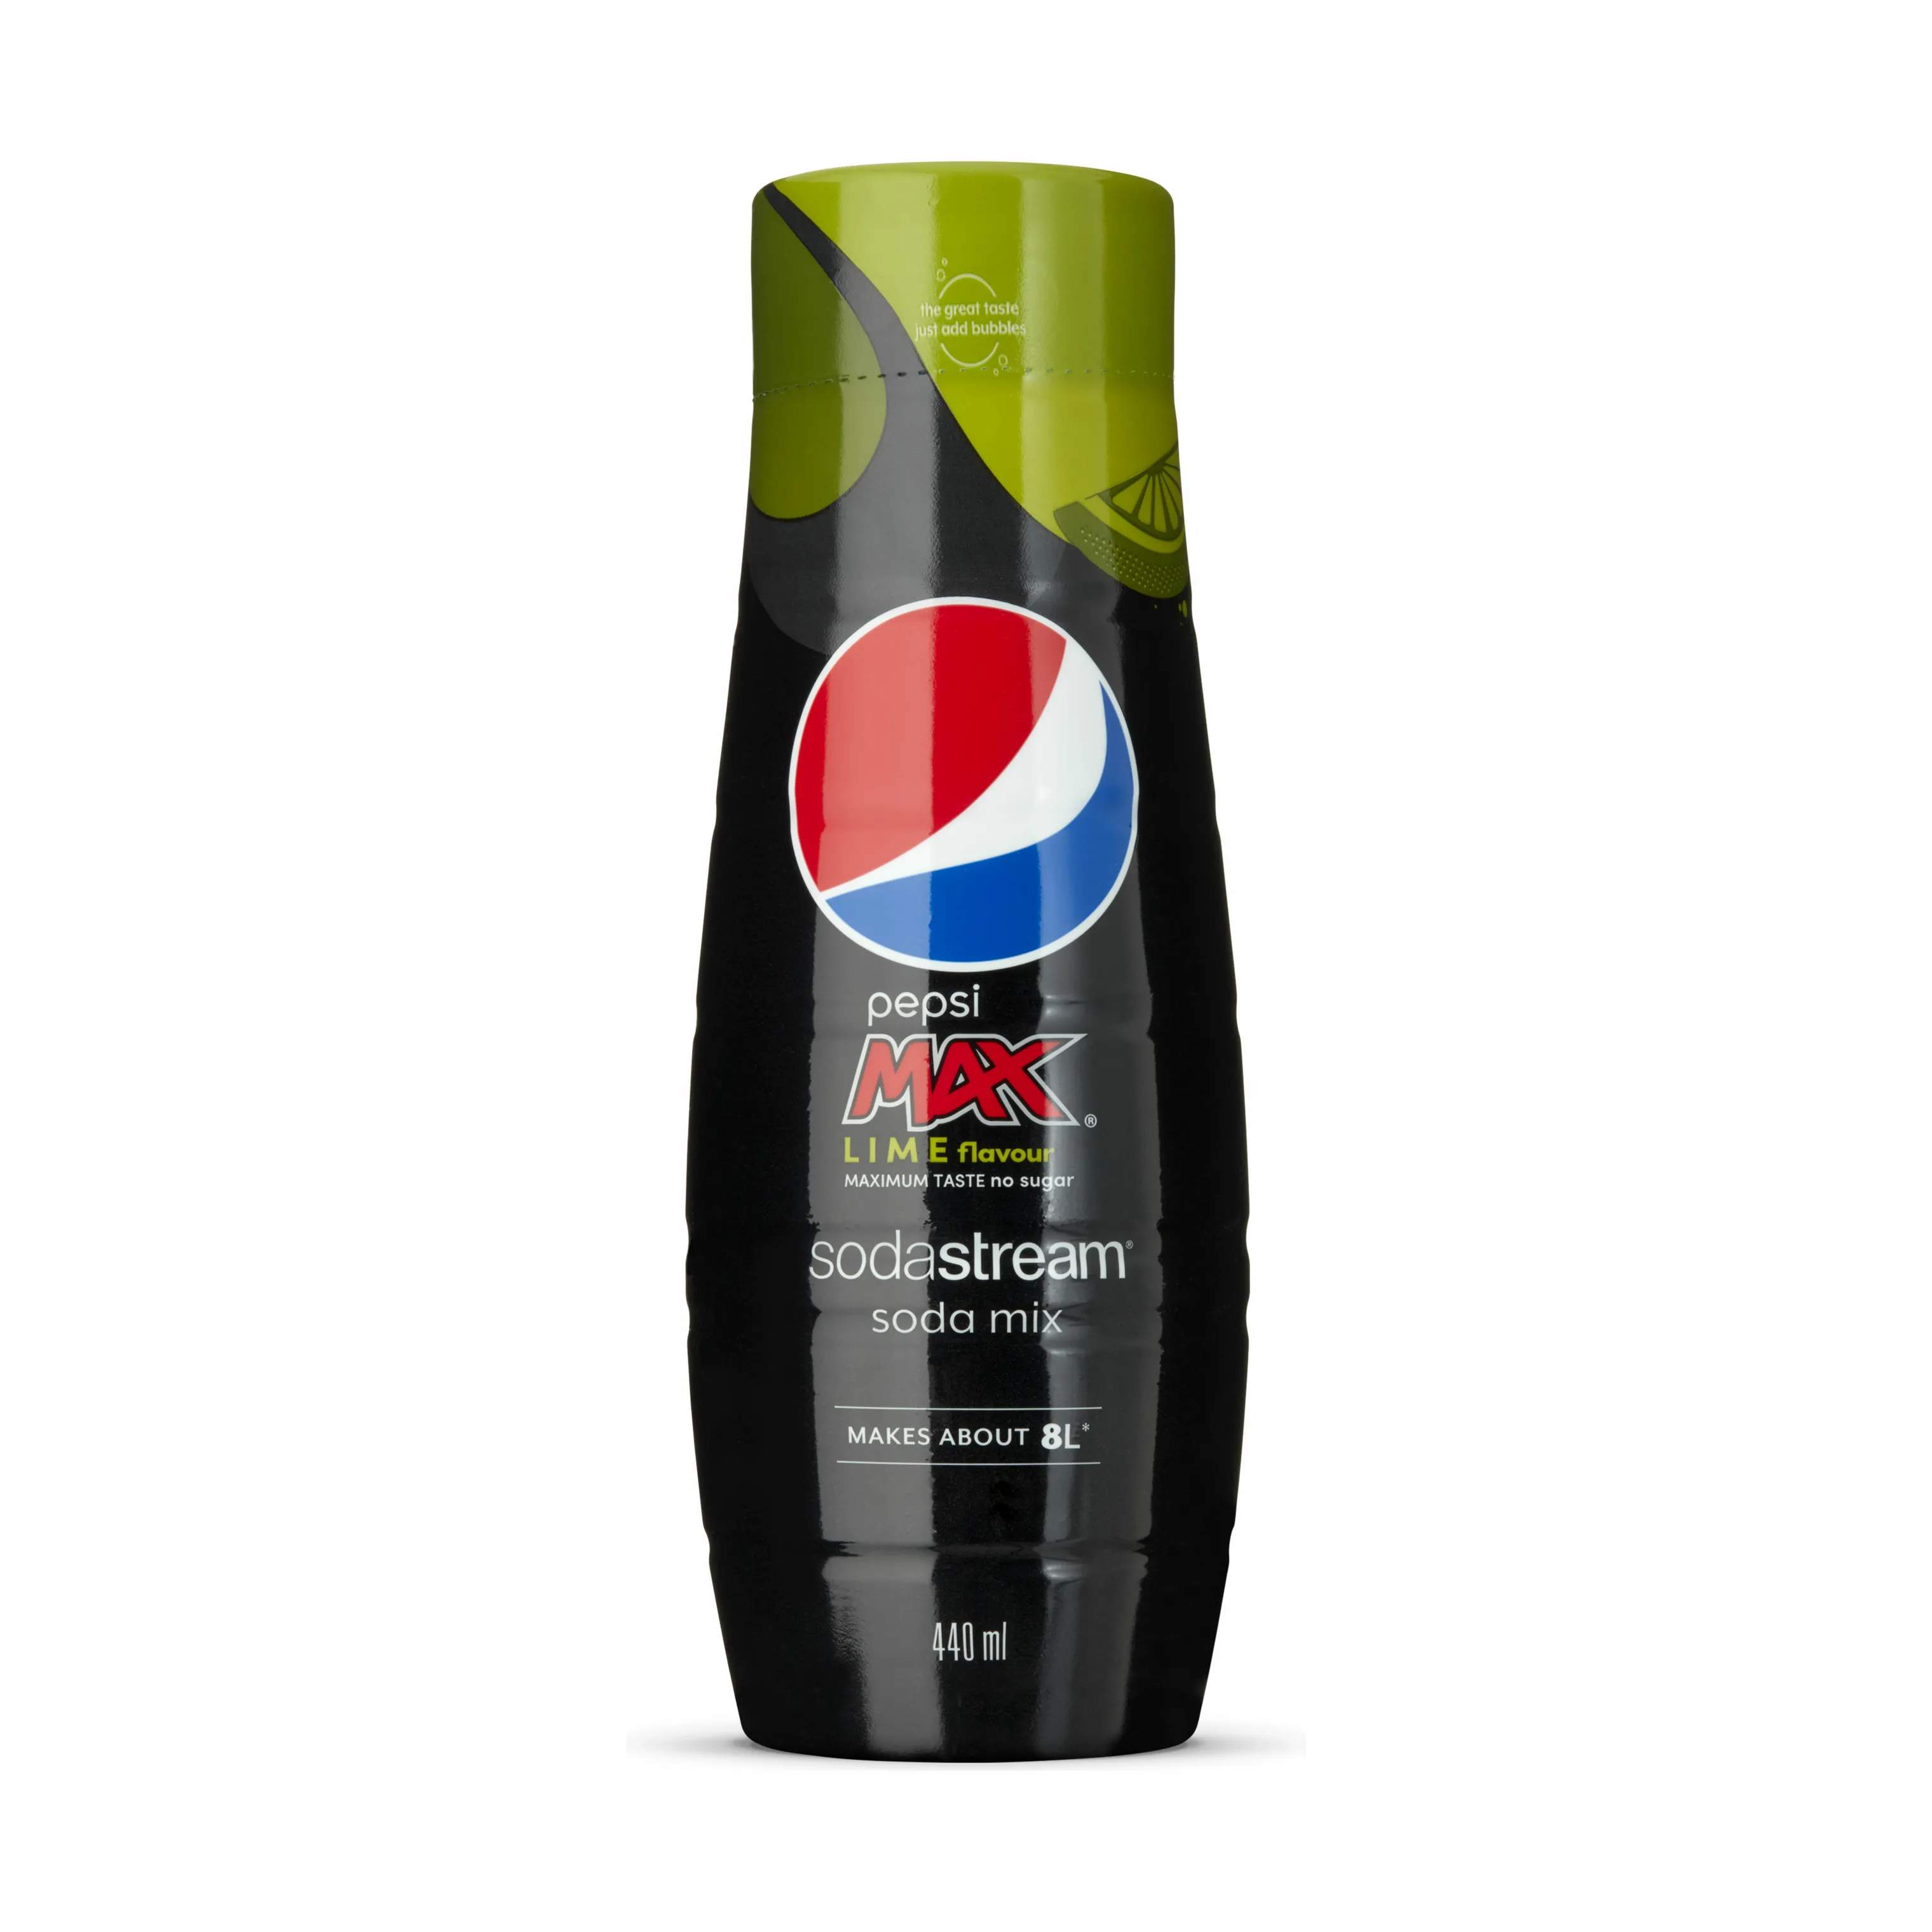 SodaStream smagskoncentrater Pepsi Max Lime